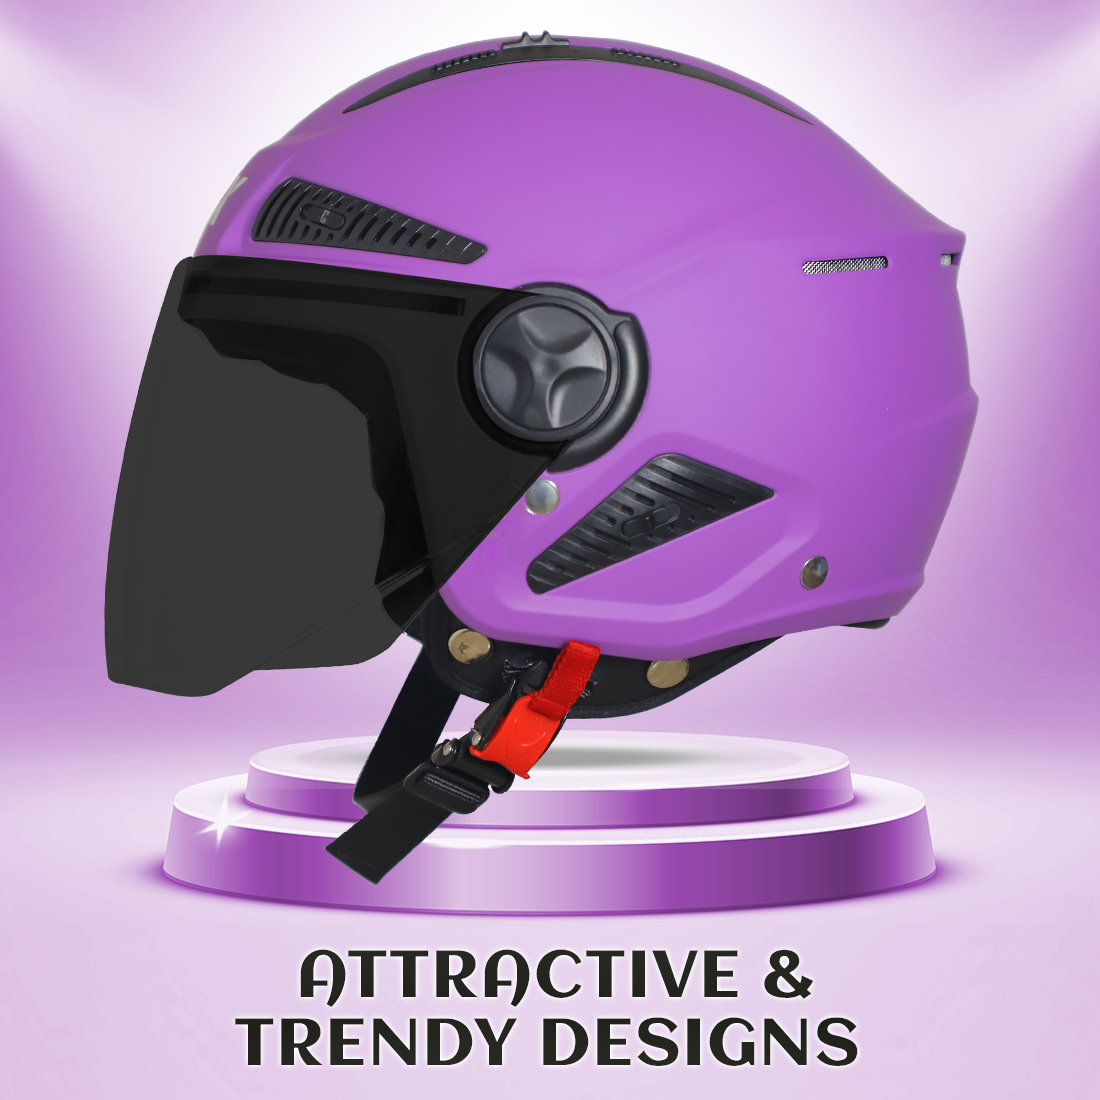 Steelbird SBH-24 Boxx ISI Certified Open Face Helmet For Men And Women (Glossy Violet With Smoke Visor)